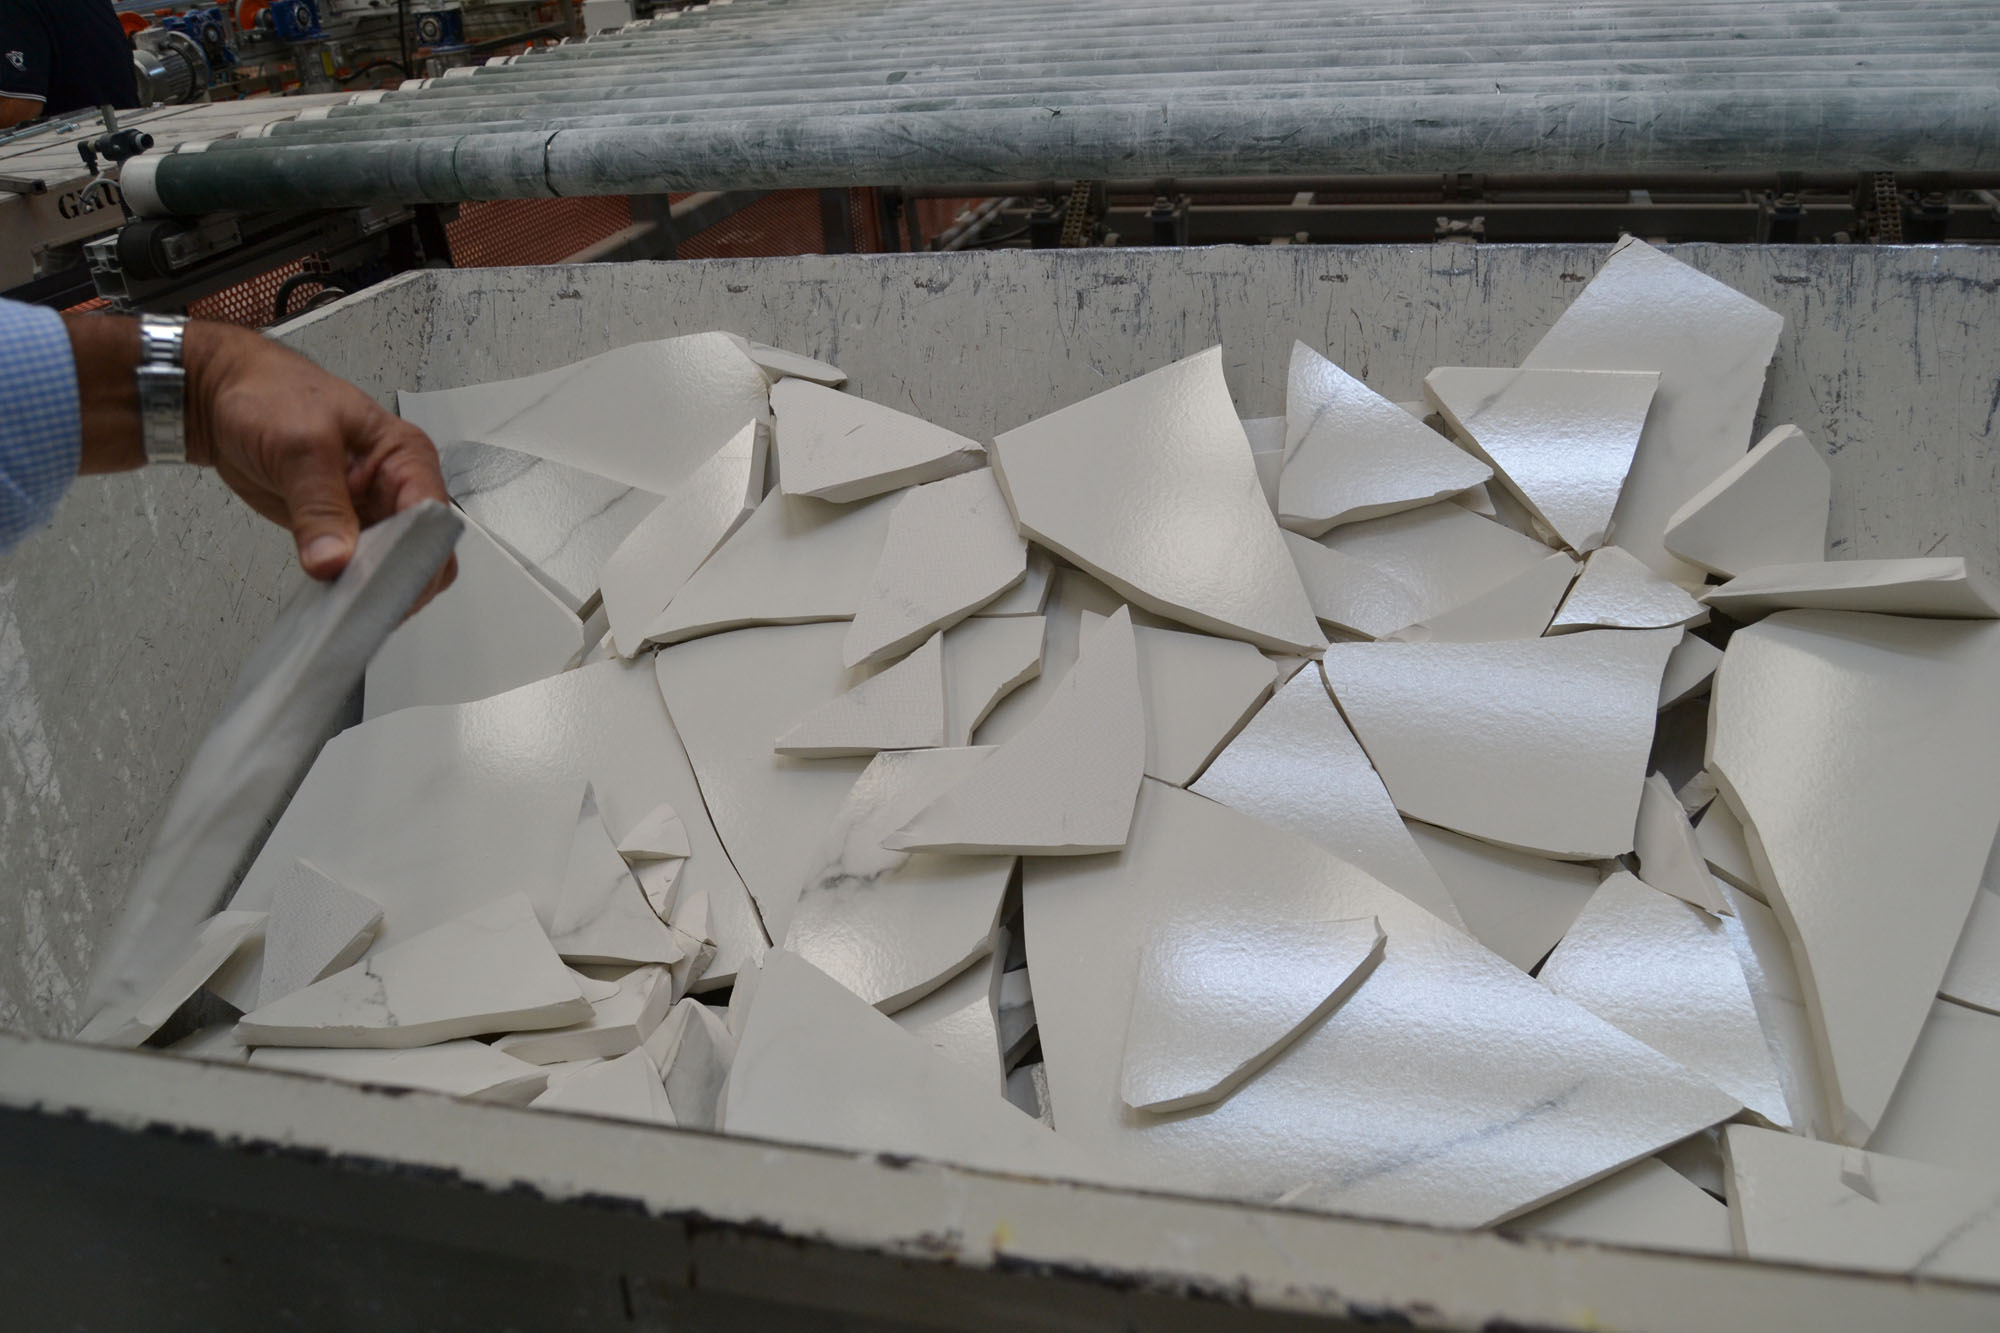 A hand picking up a shard of white, broken clay tile from a bin full of them.